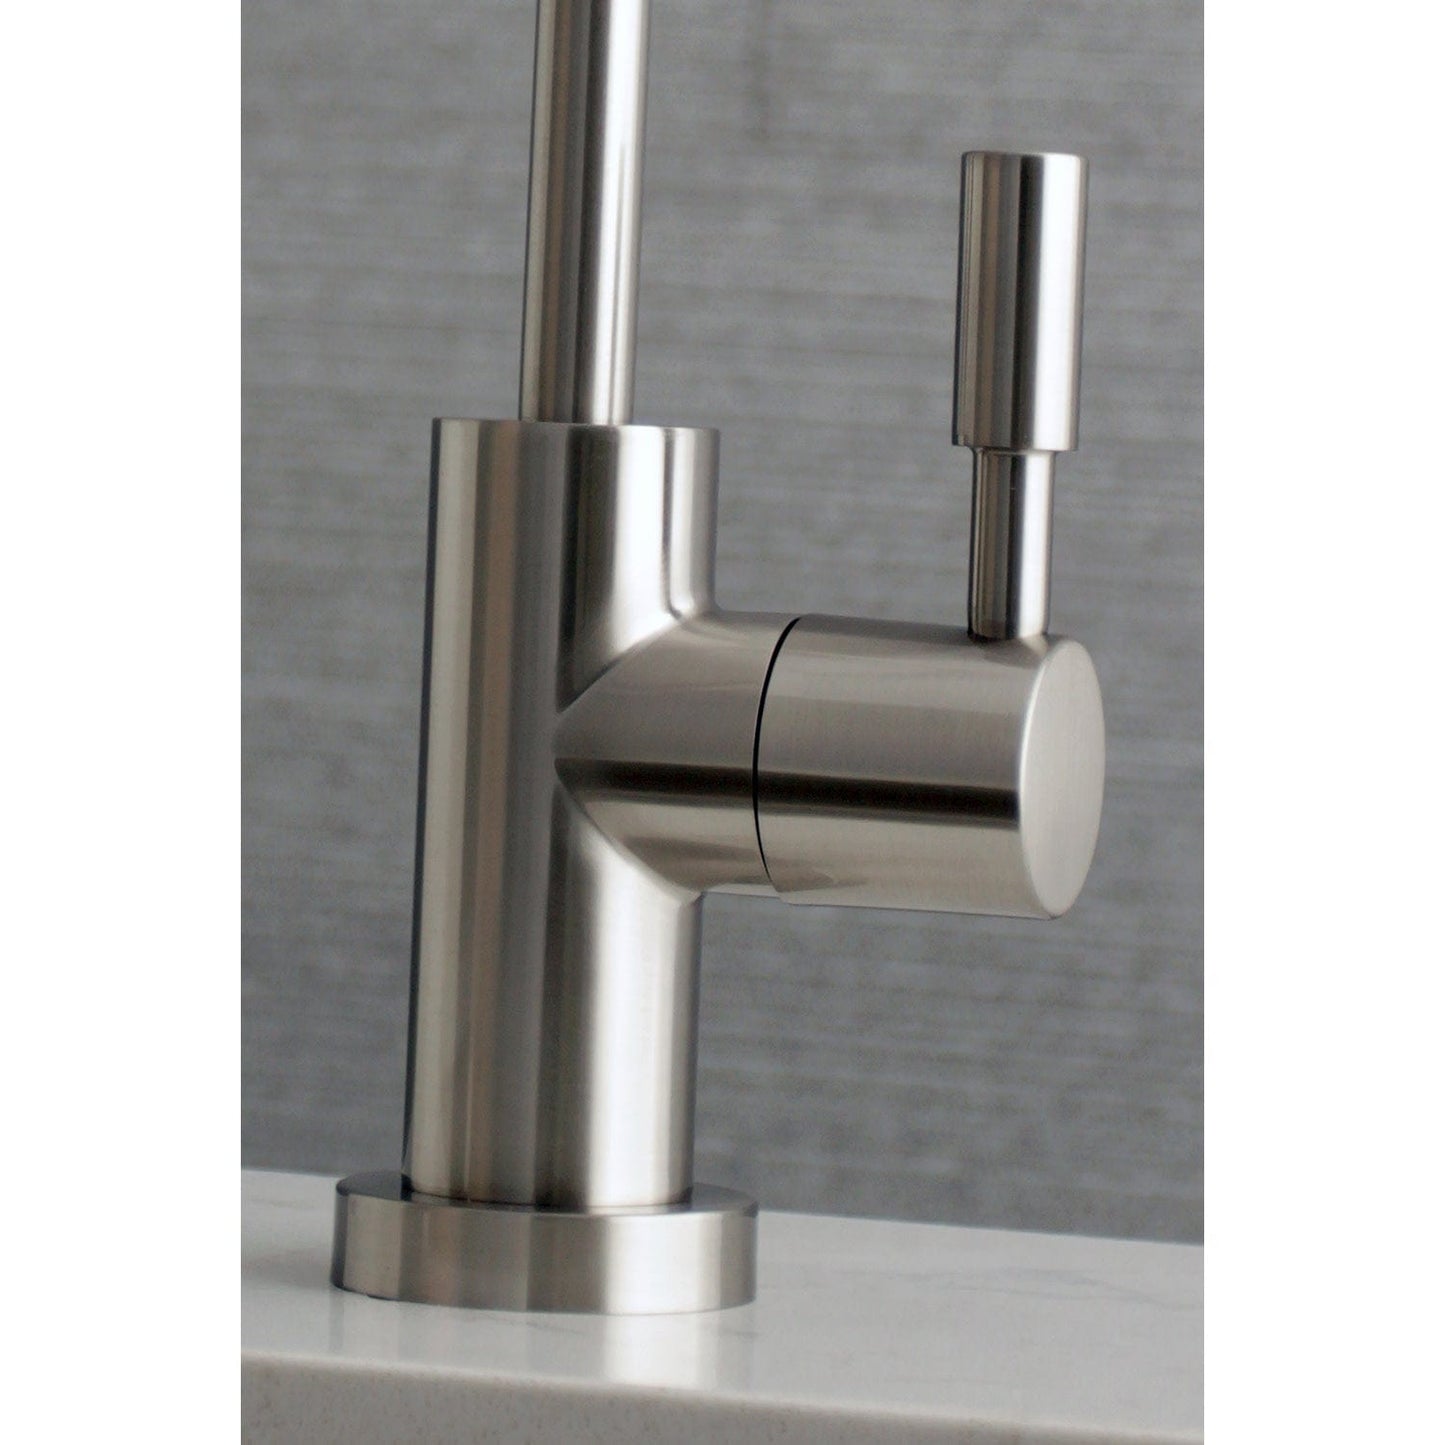 KINGSTON Brass Concord Reverse Osmosis System Filtration Water Air Gap Faucet - Brushed Nickel